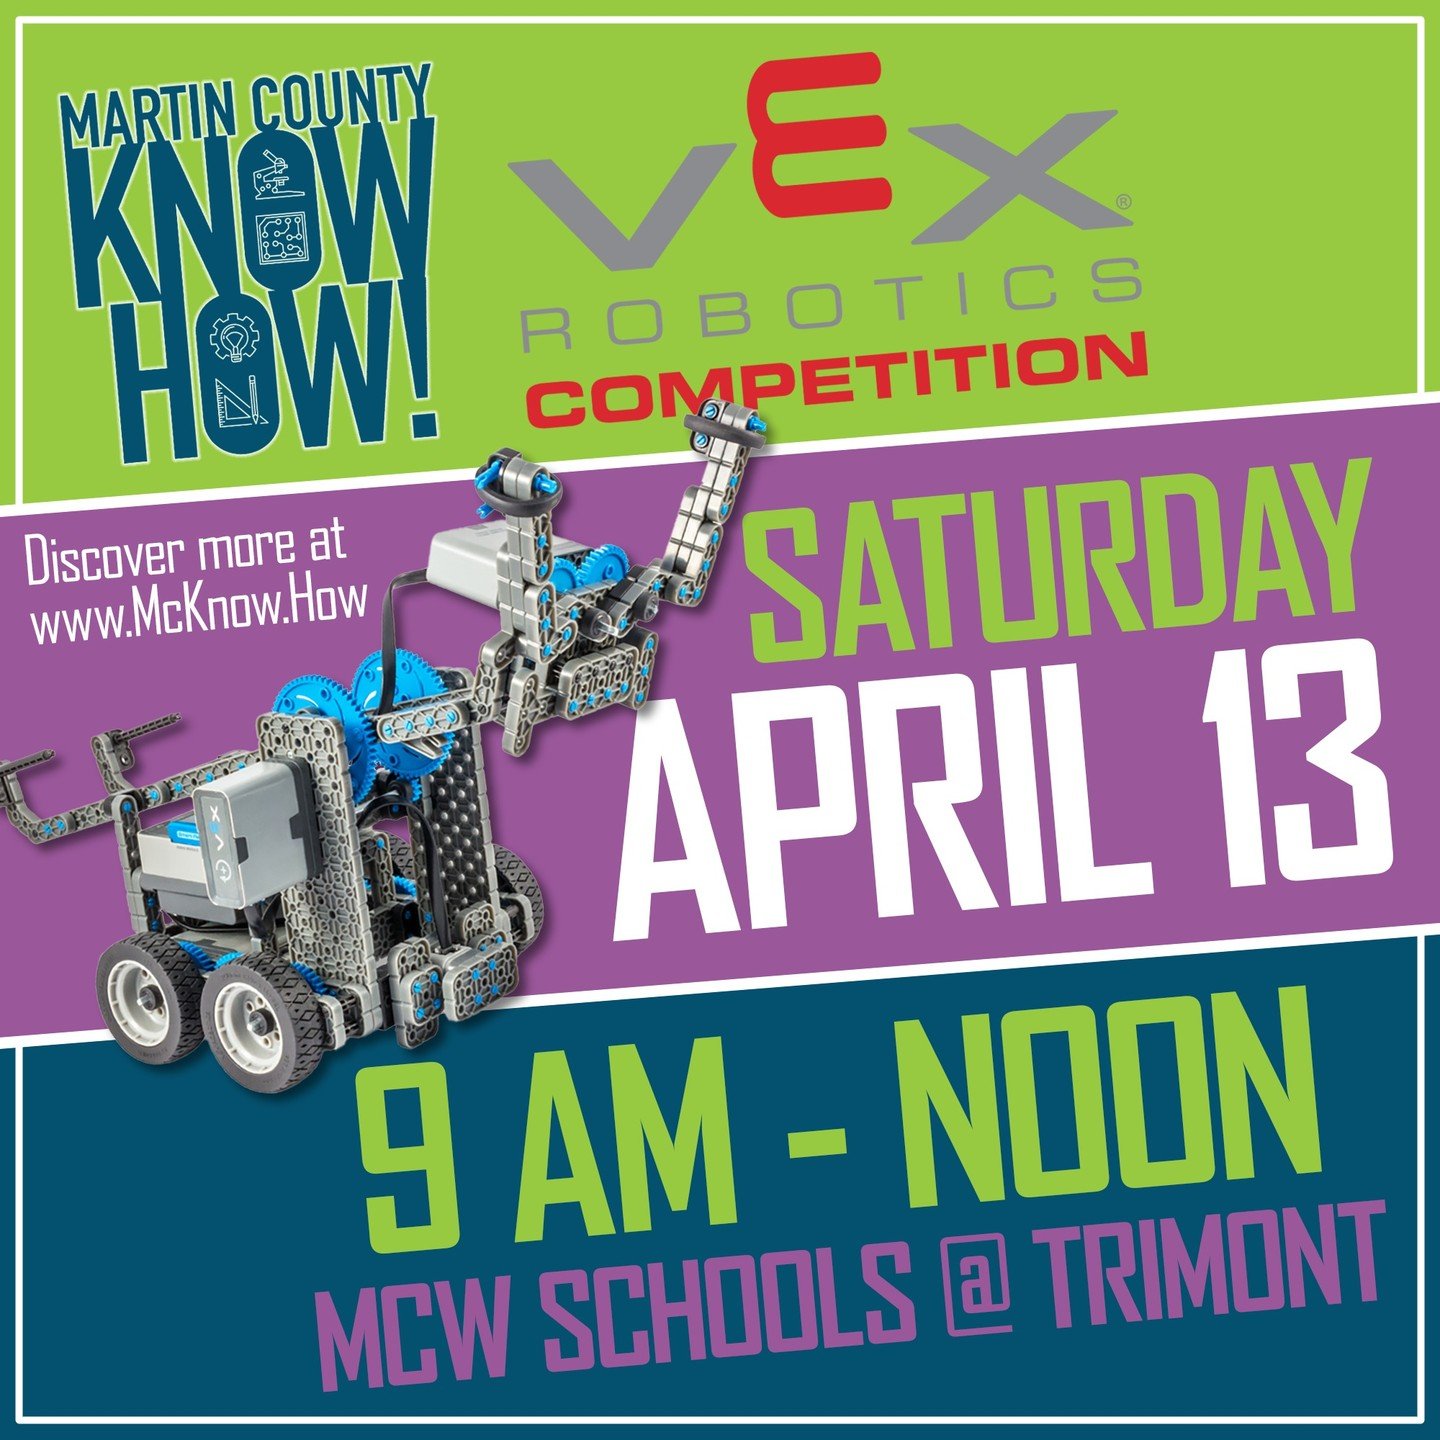 Our next robotics competition is right around the corner! Come cheer on 3rd &amp; 4th grade students from across the county as they put their STEM skills into action!

For details visit www.McKnow.How and check out the events calendar! #VEXIQ #roboti